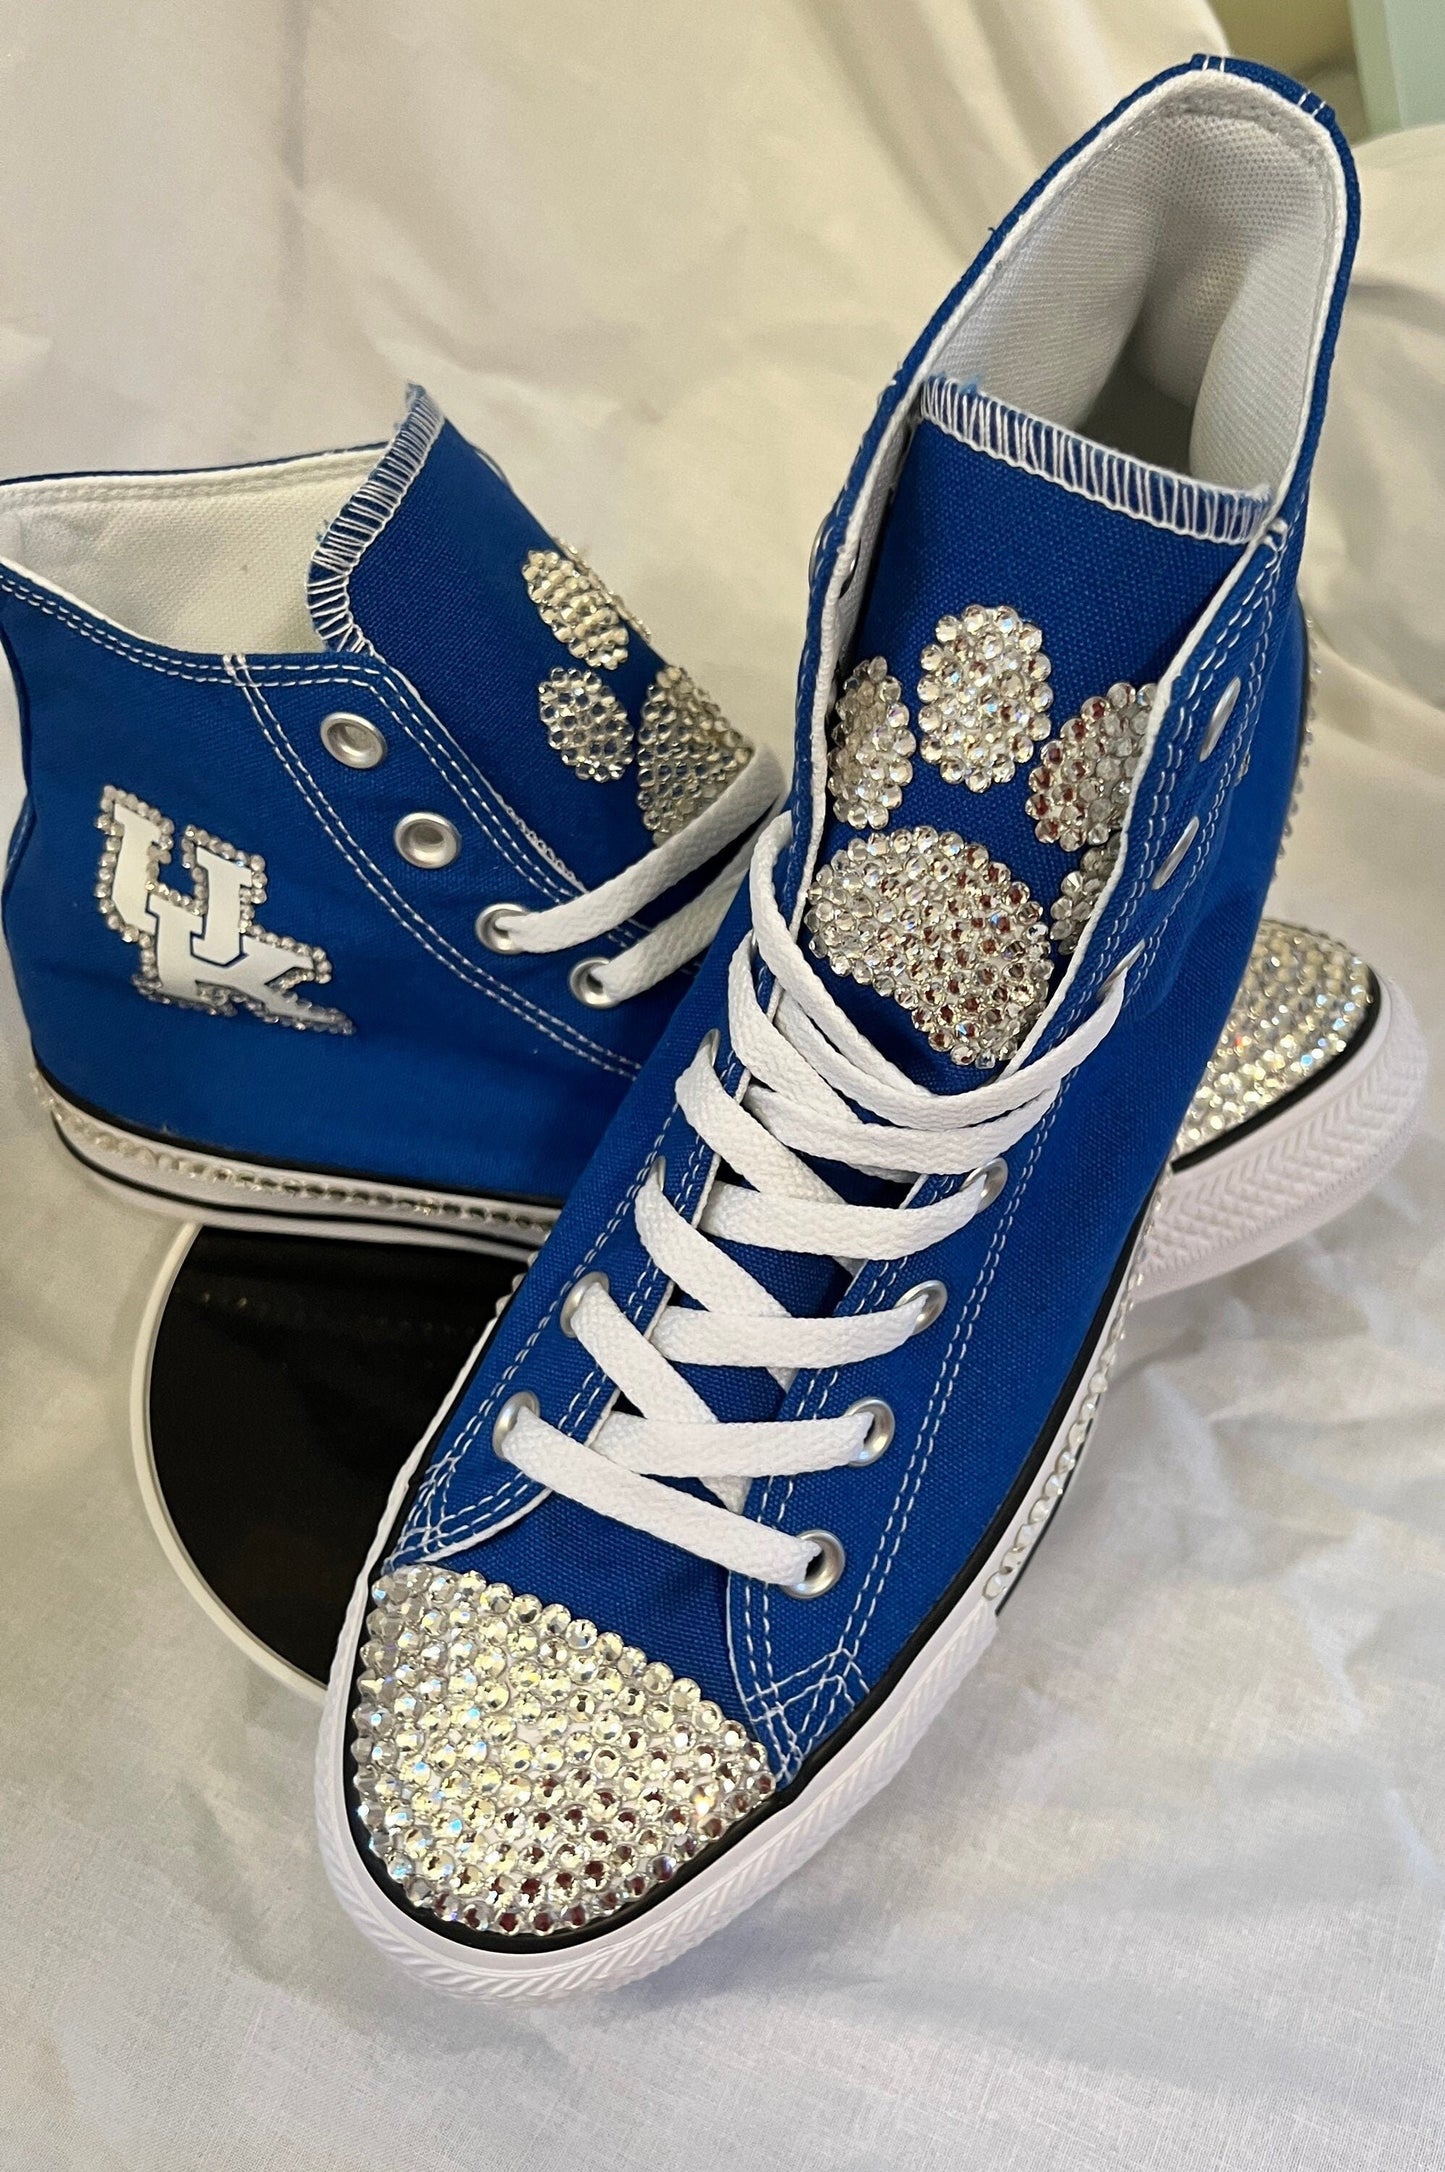 Professional or College Tennis Shoes, converse, wedding, quinceanera, bling shoes